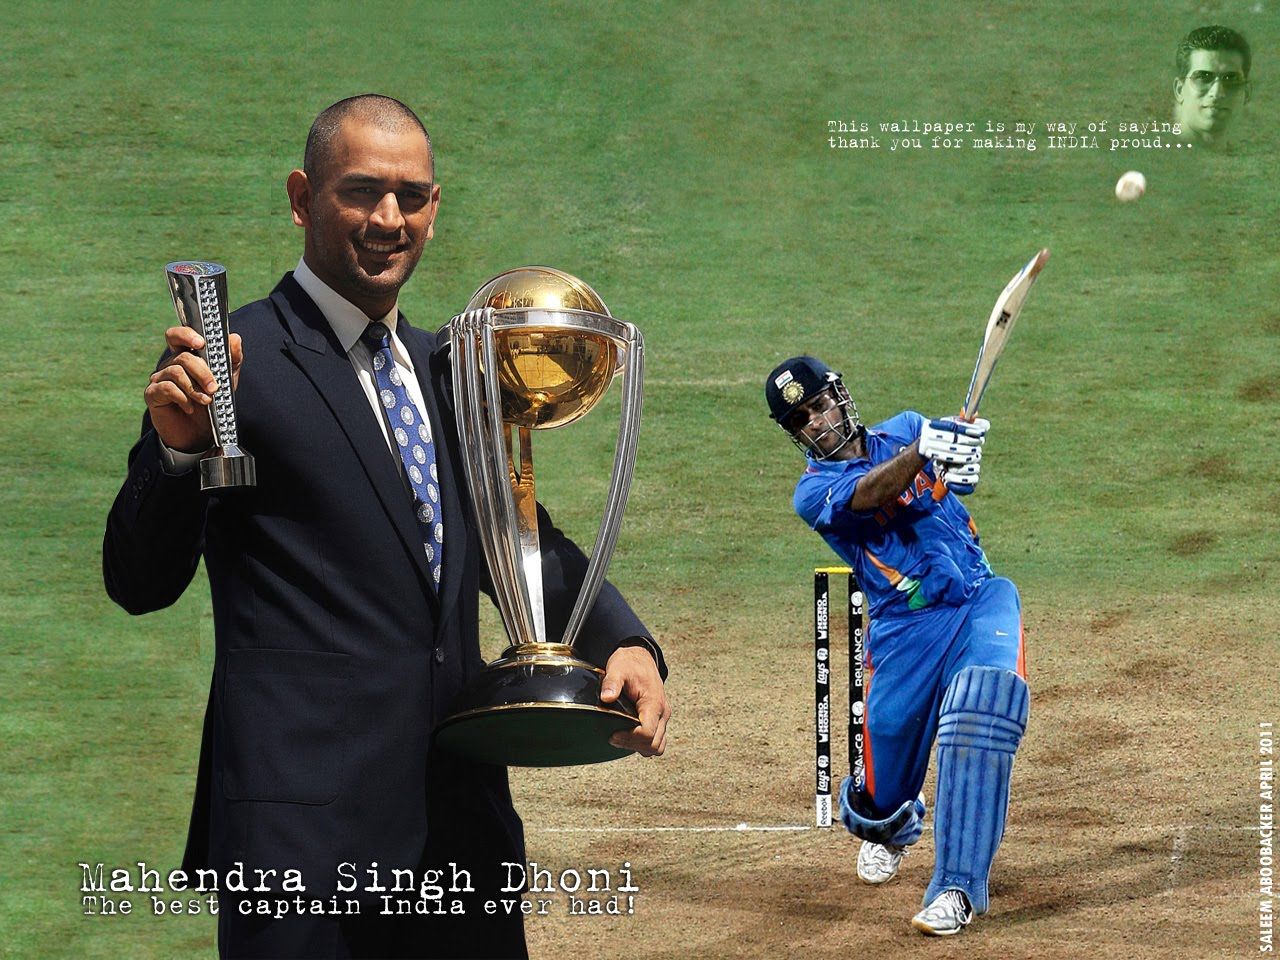 MS Dhoni Wallpapers Pack 3 | Cute Girls Celebrity Wallpaper